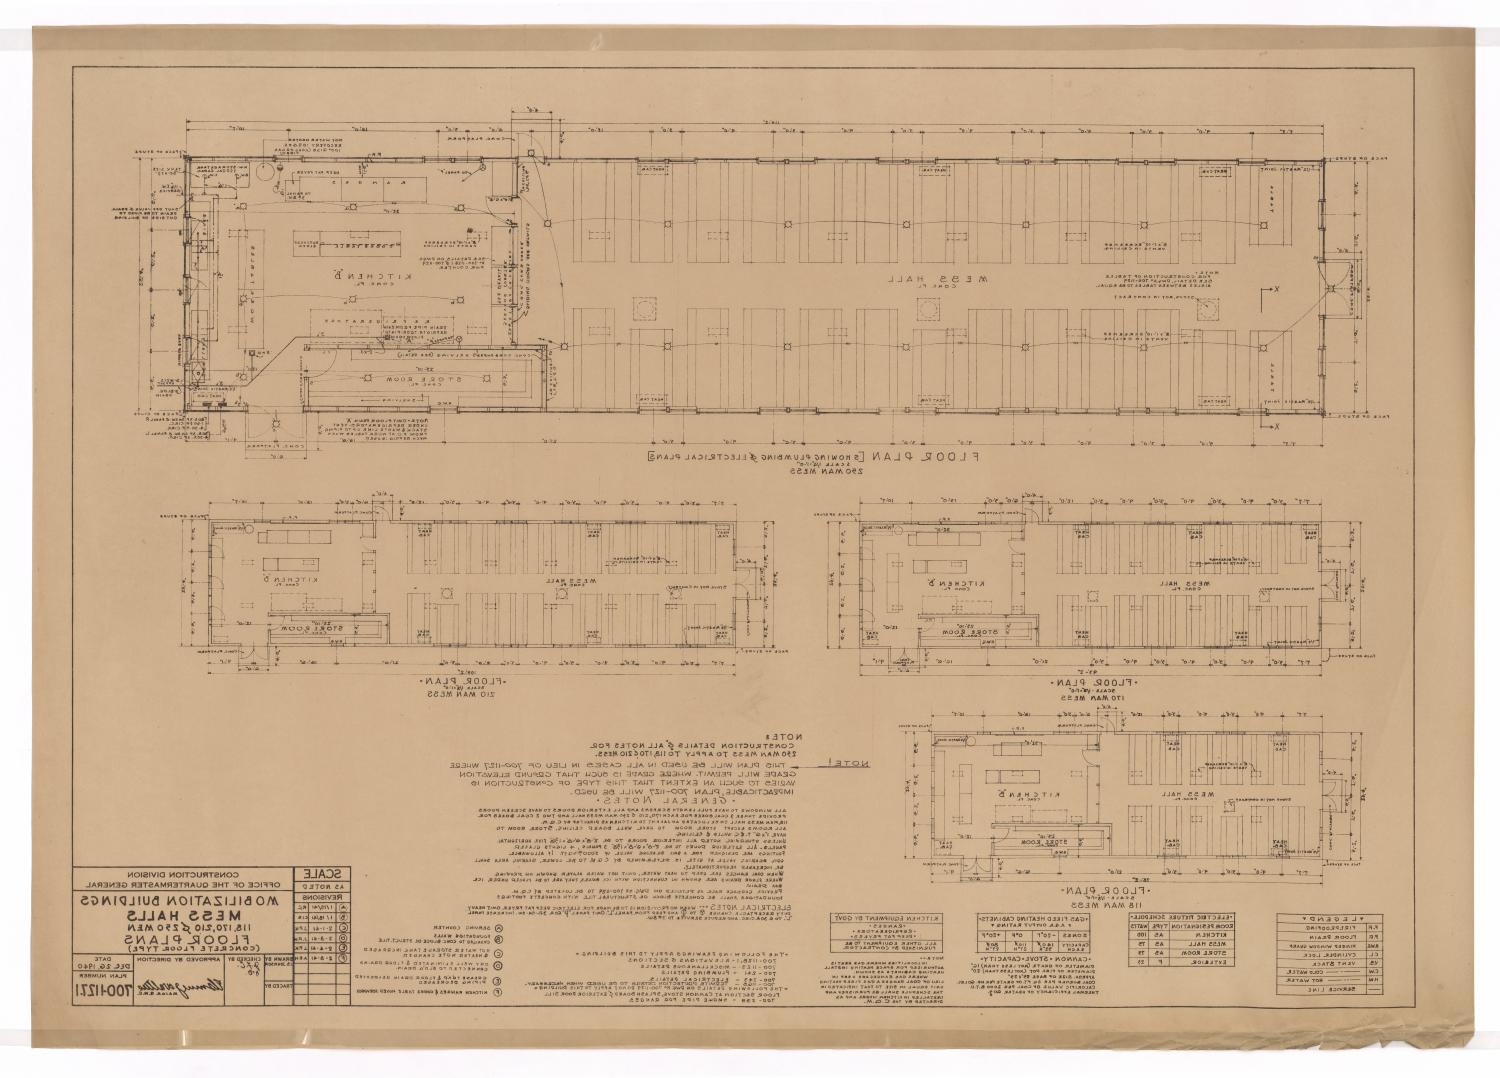 Army Mobilization Buildings Mess Hall Floor Plans Part